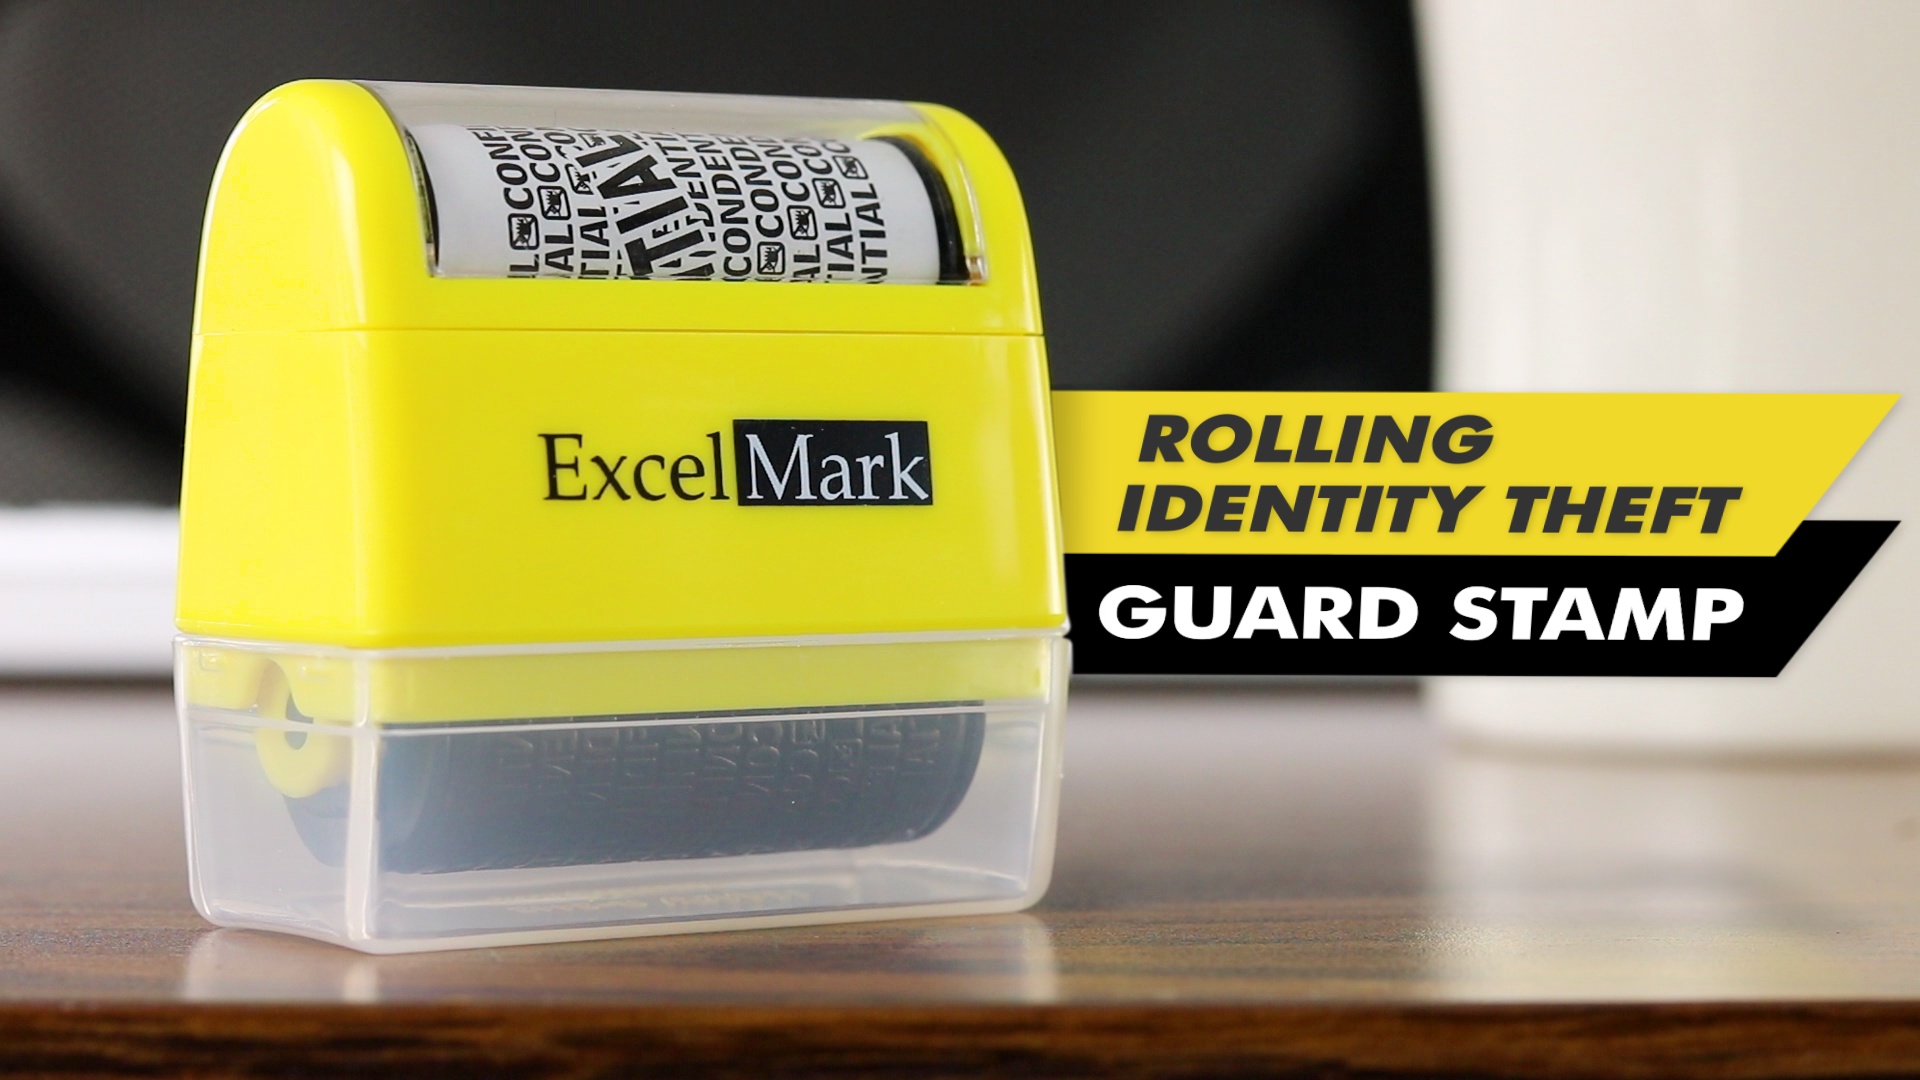 Roller stamp data security protection theft prevention id identity guard rolPYB 